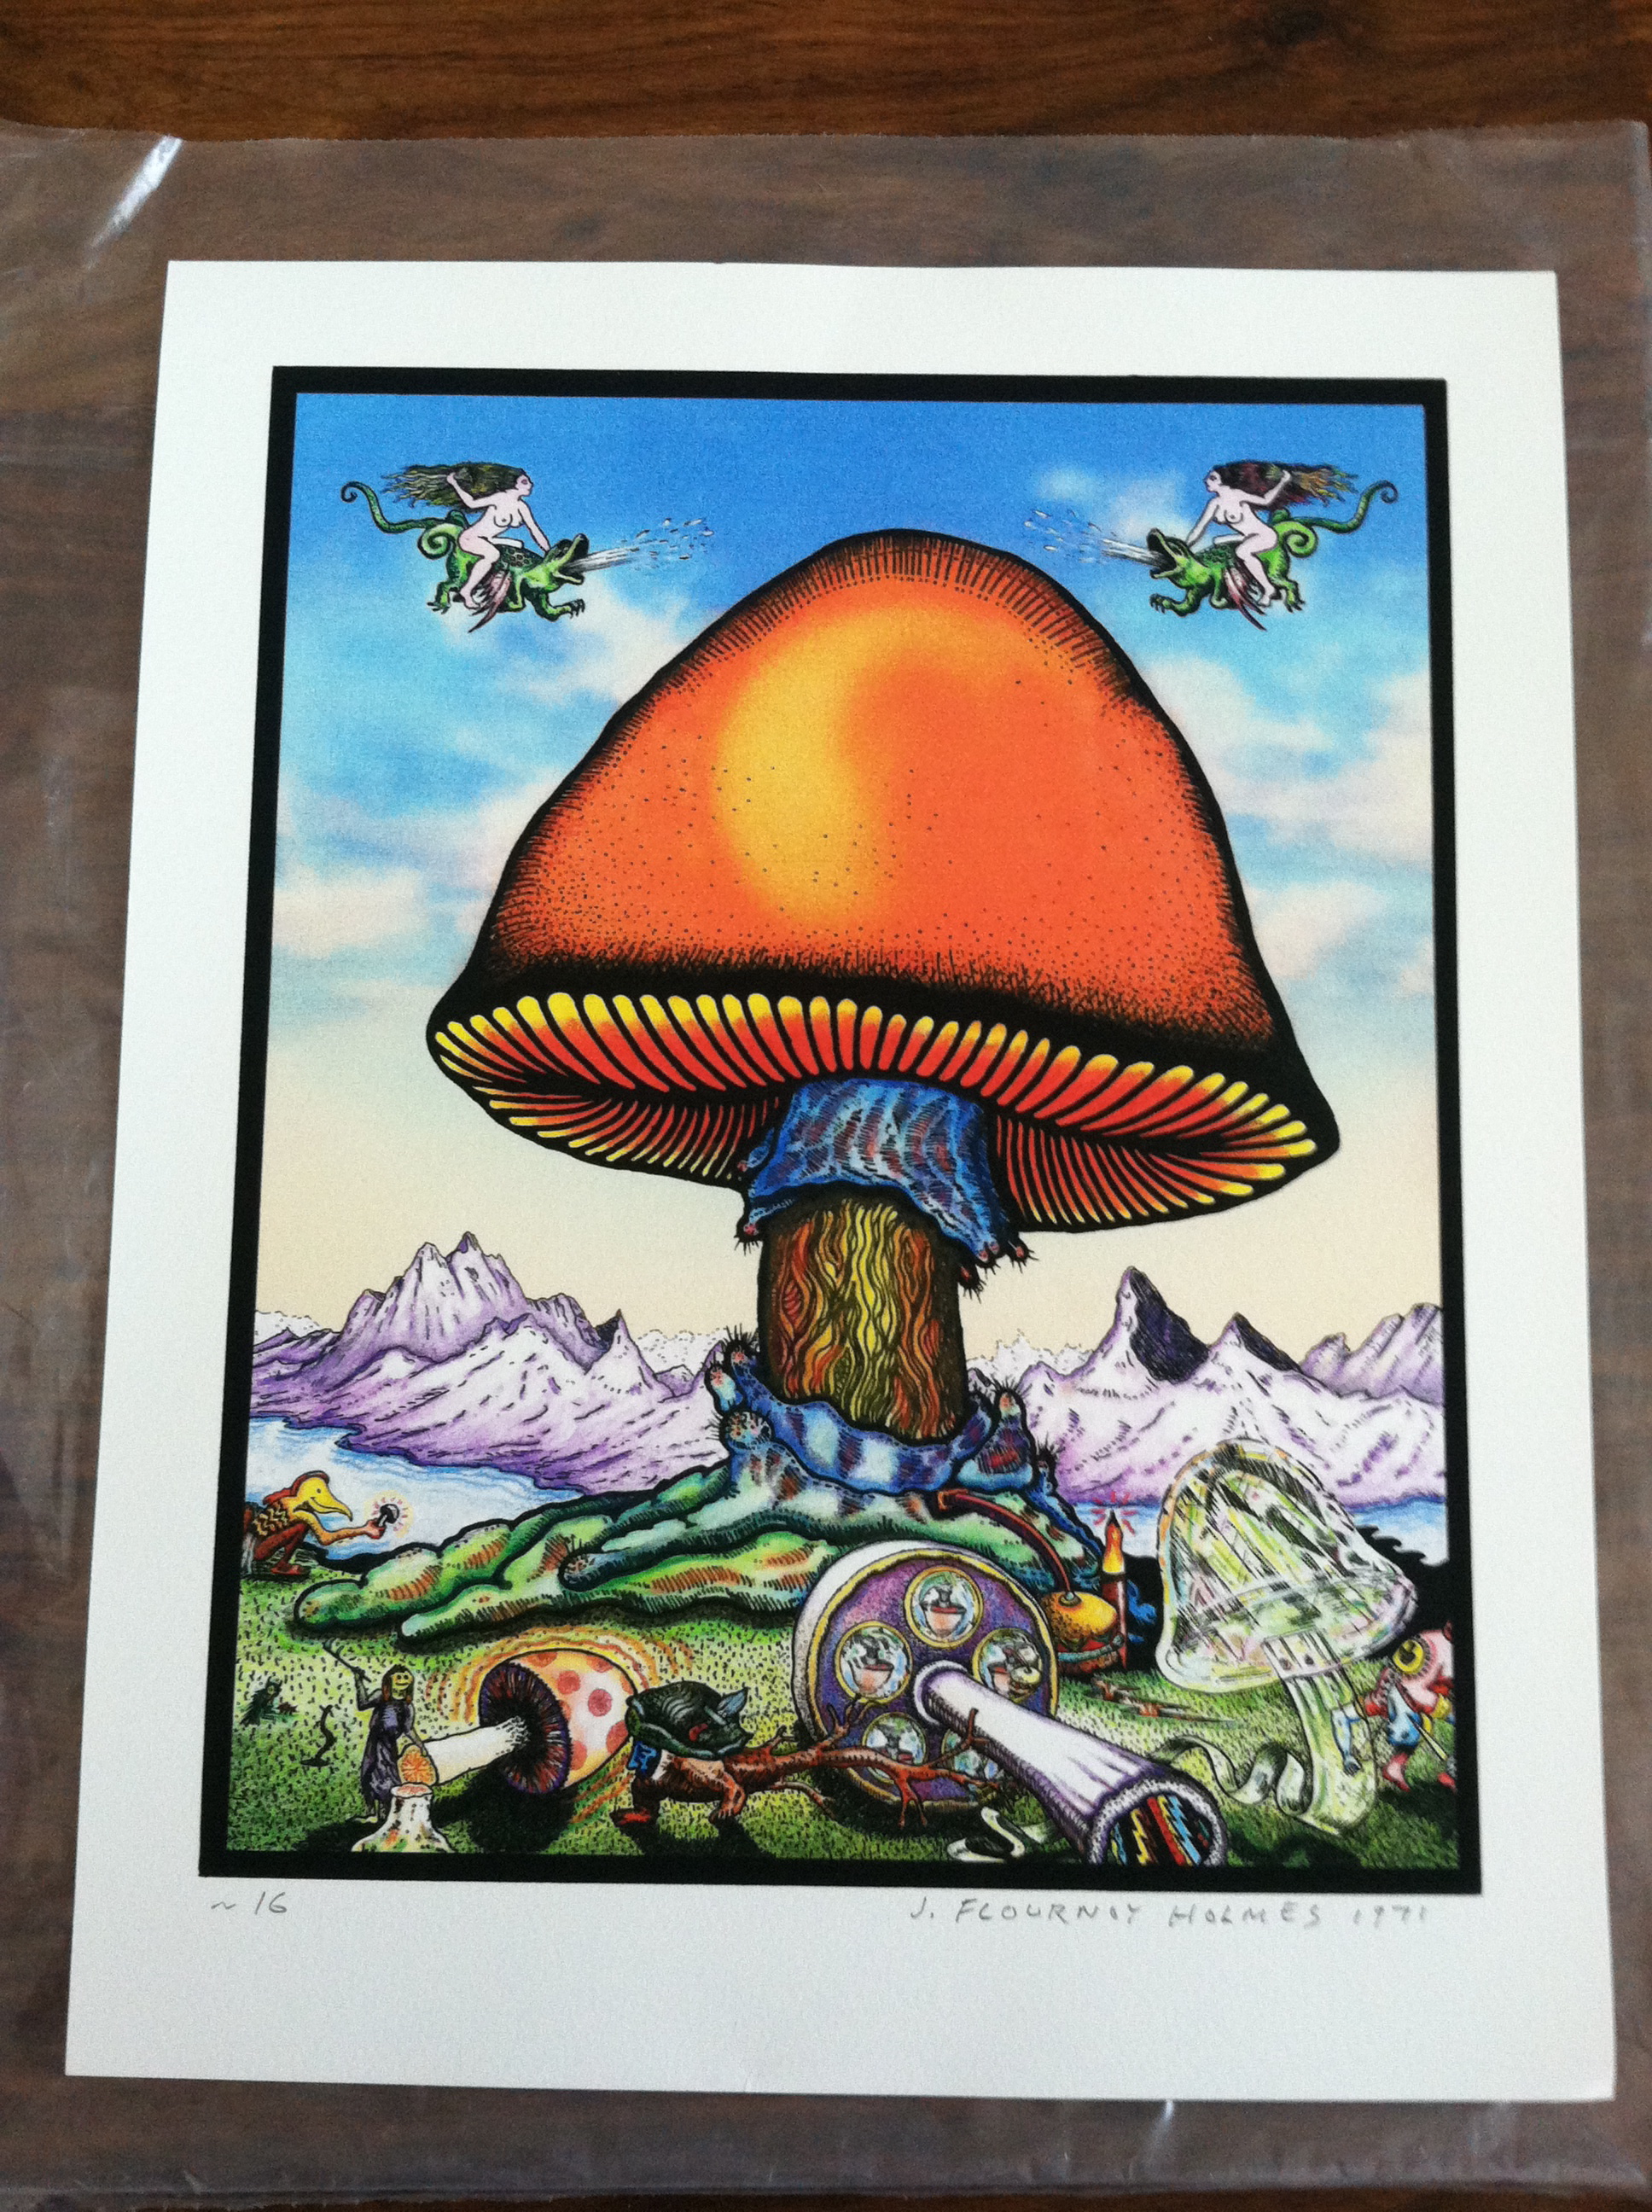 Print from Flournoy Holmes, designer of the Eat a Peach artwork, among others. Several Eat a Peach gatefold characters in the print. 